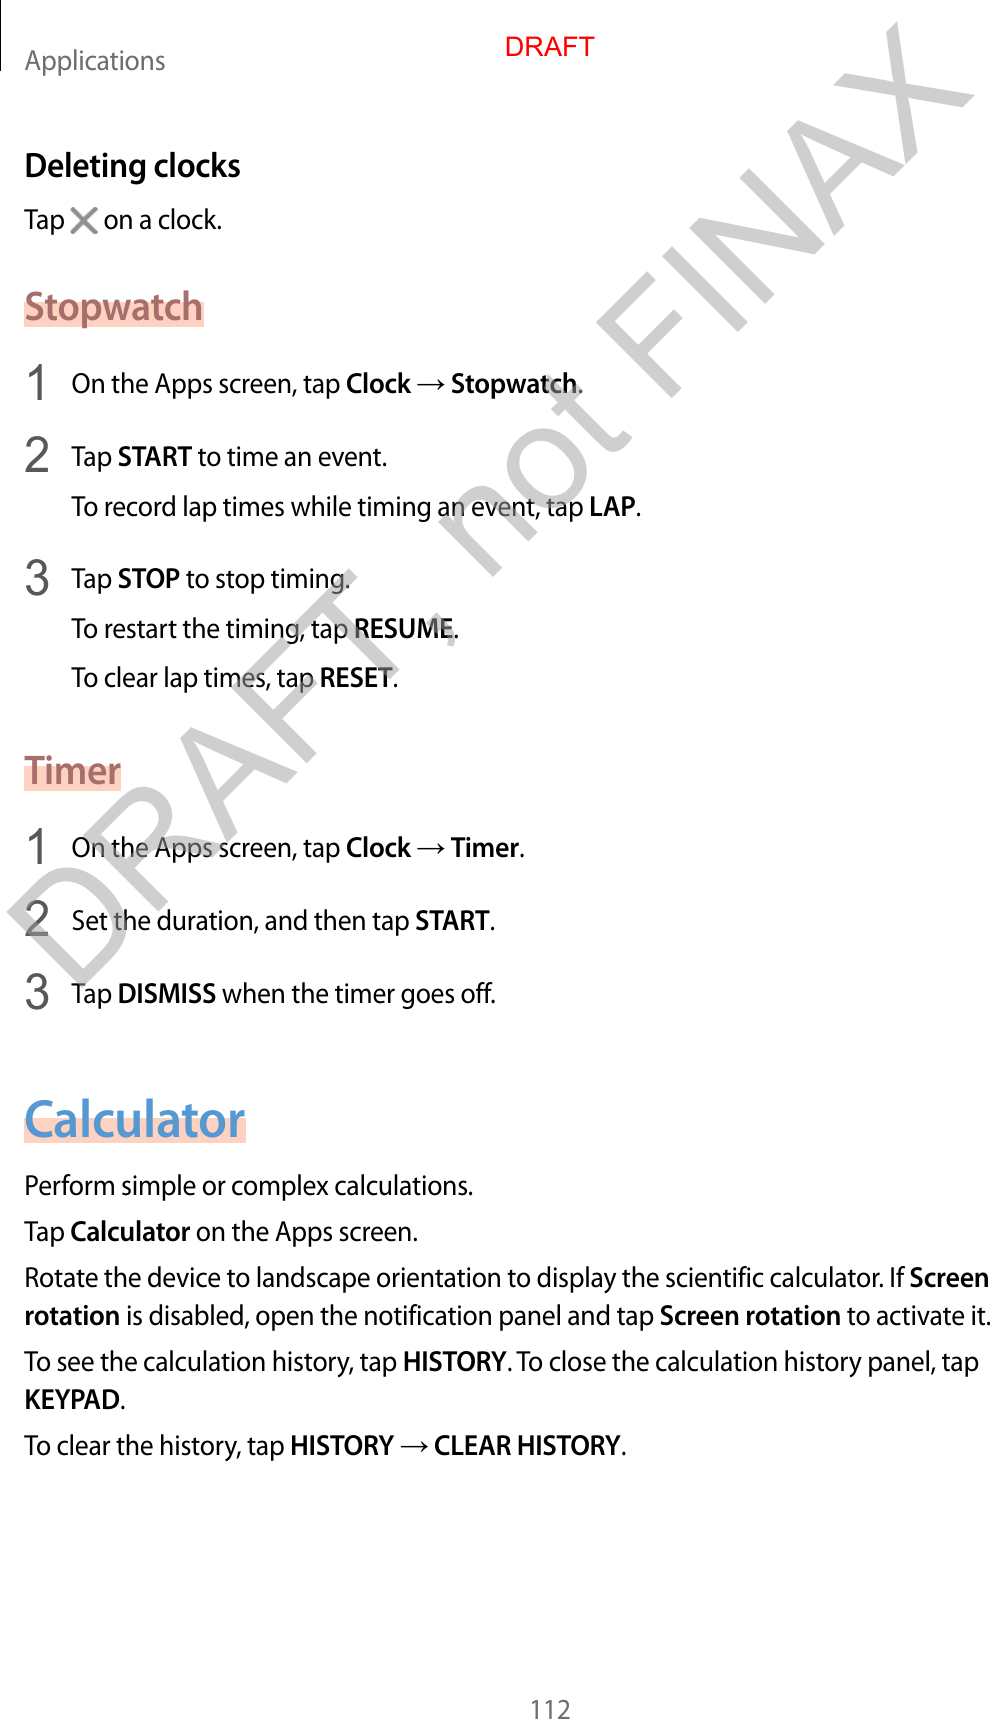 Applications112Deleting clocksTap   on a clock.Stopwatch1  On the Apps screen, tap Clock  Stopwatch.2  Tap START to time an event.To record lap times while timing an event, tap LAP.3  Tap STOP to stop timing.To restart the timing, tap RESUME.To clear lap times, tap RESET.Timer1  On the Apps screen, tap Clock  Timer.2  Set the duration, and then tap START.3  Tap DISMISS when the timer goes off.CalculatorPerform simple or complex calculations.Tap Calculator on the Apps screen.Rotate the device to landscape orientation to display the scientific calculator. If Screen rotation is disabled, open the notification panel and tap Screen rotation to activate it.To see the calculation history, tap HISTORY. To close the calculation history panel, tap KEYPAD.To clear the history, tap HISTORY  CLEAR HISTORY.DRAFTDRAFT, not FINAX